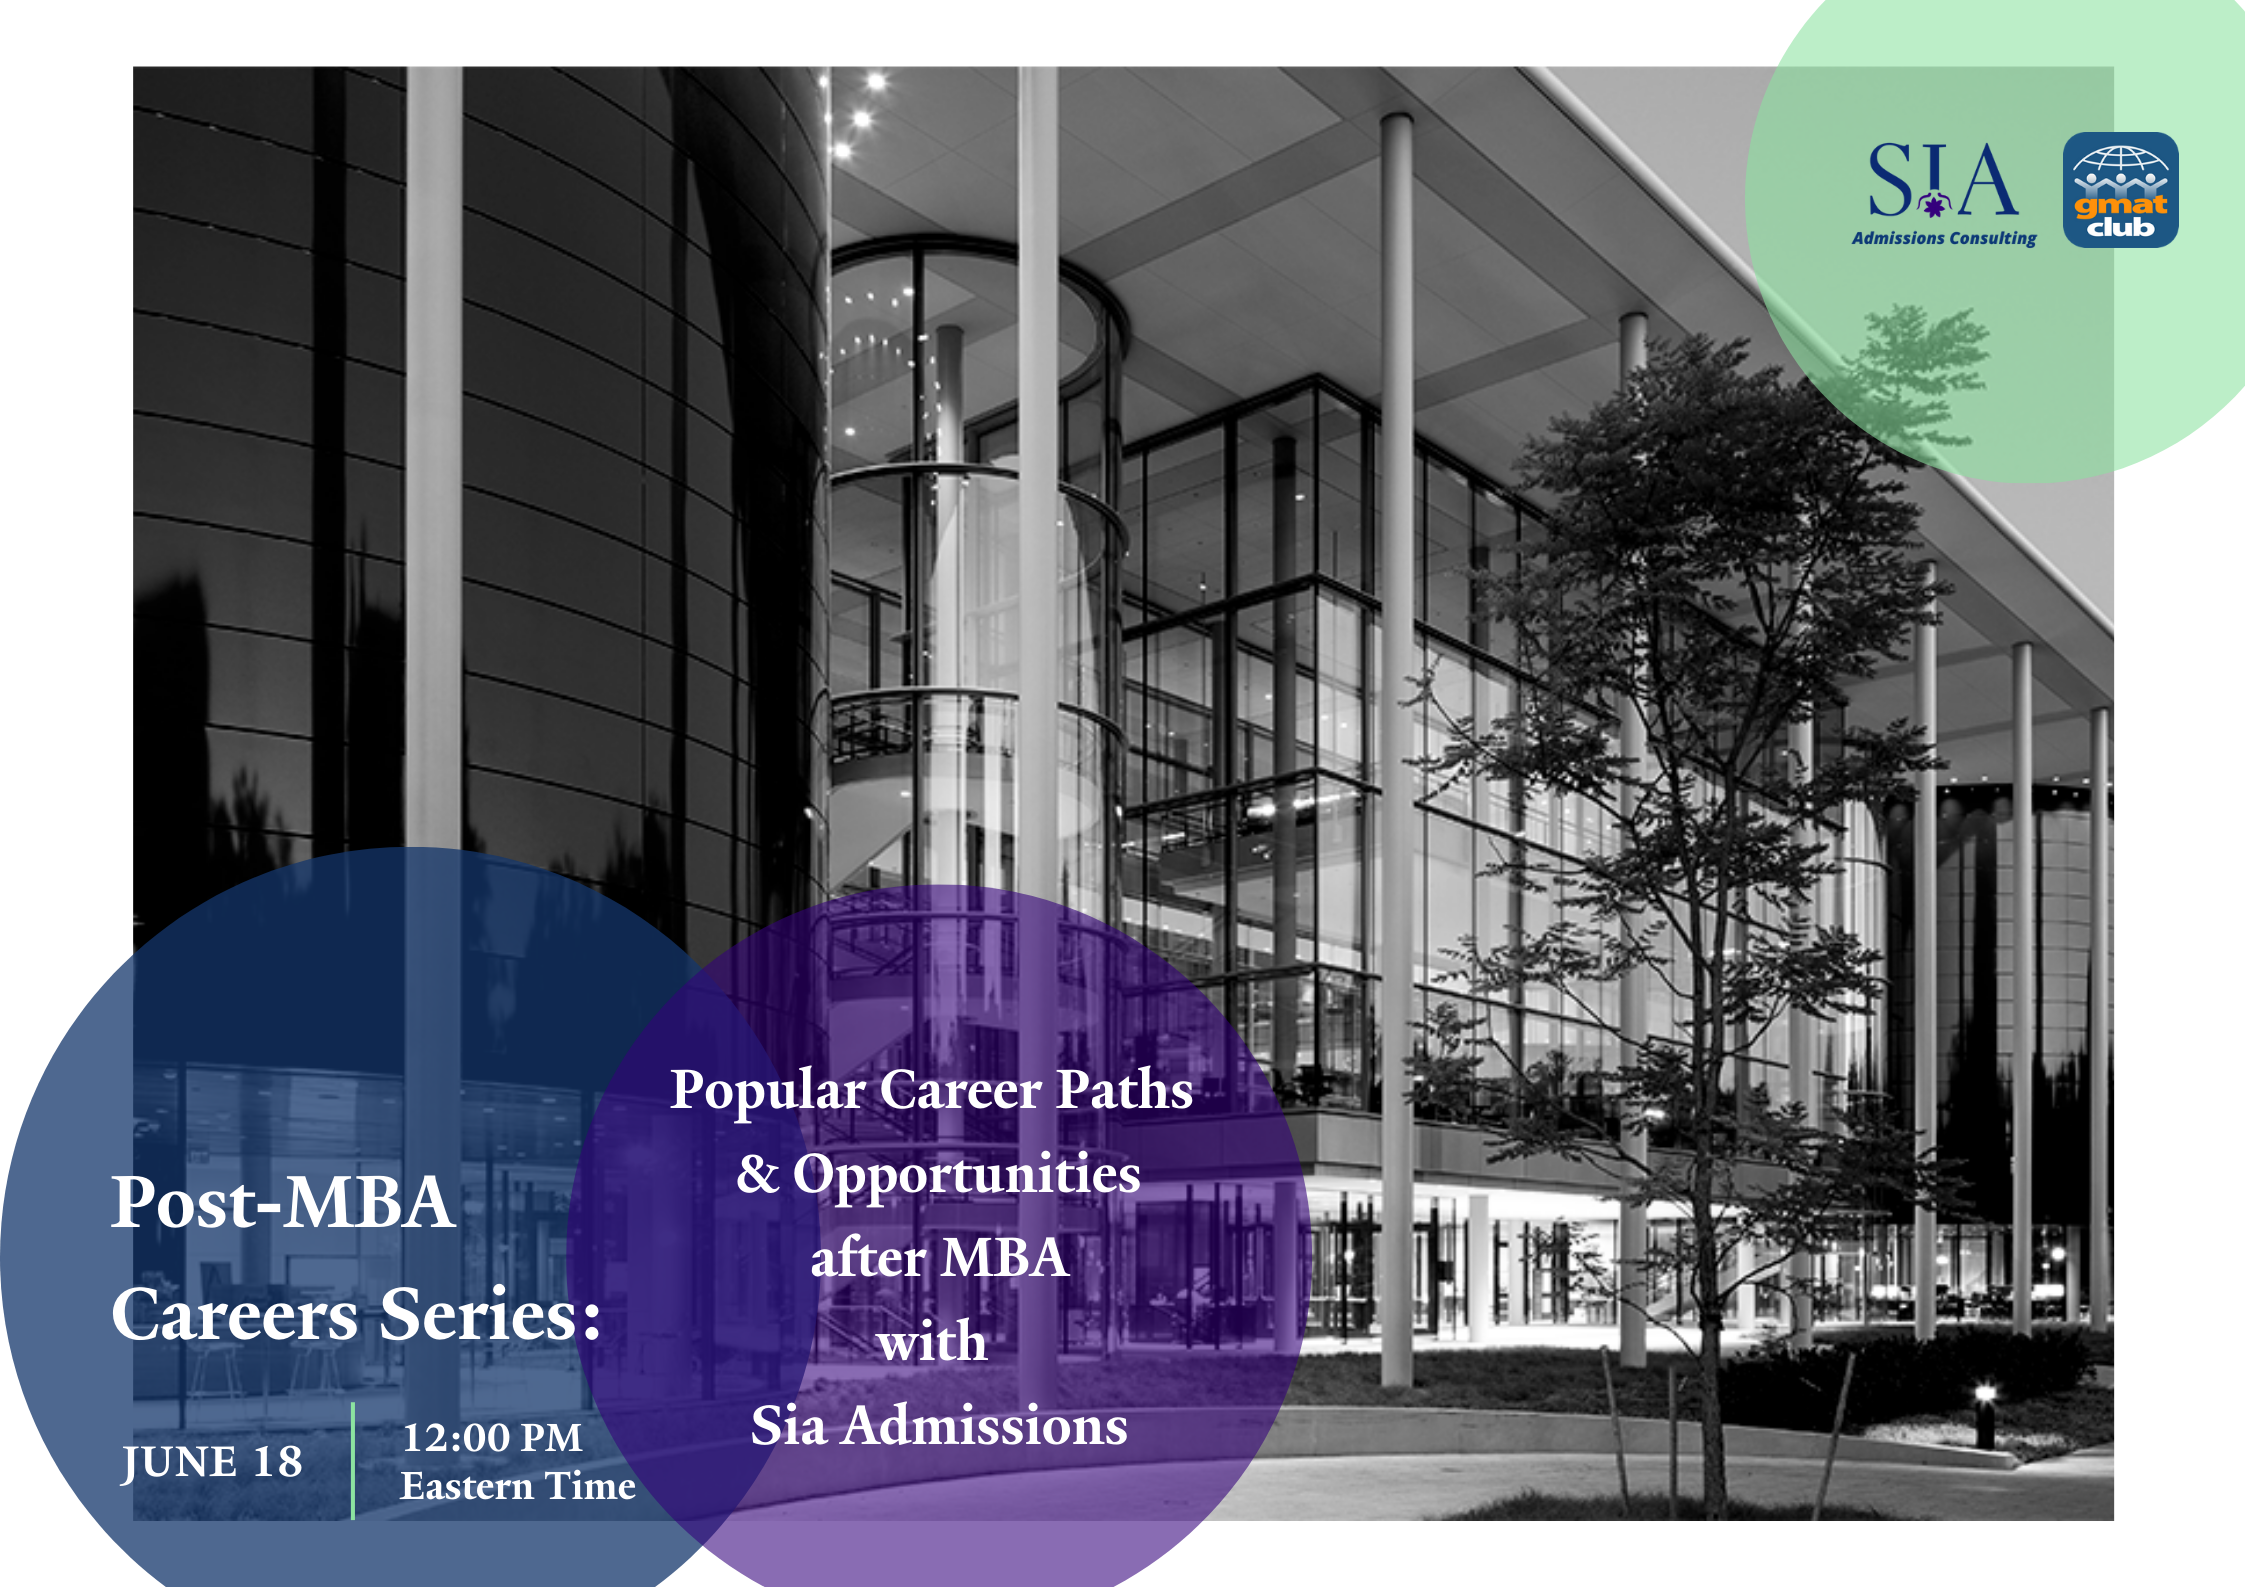 Sia Admissions - Post-MBA Careers Series: Popular Career Paths &  Opportunities after MBA with Sia Admissions